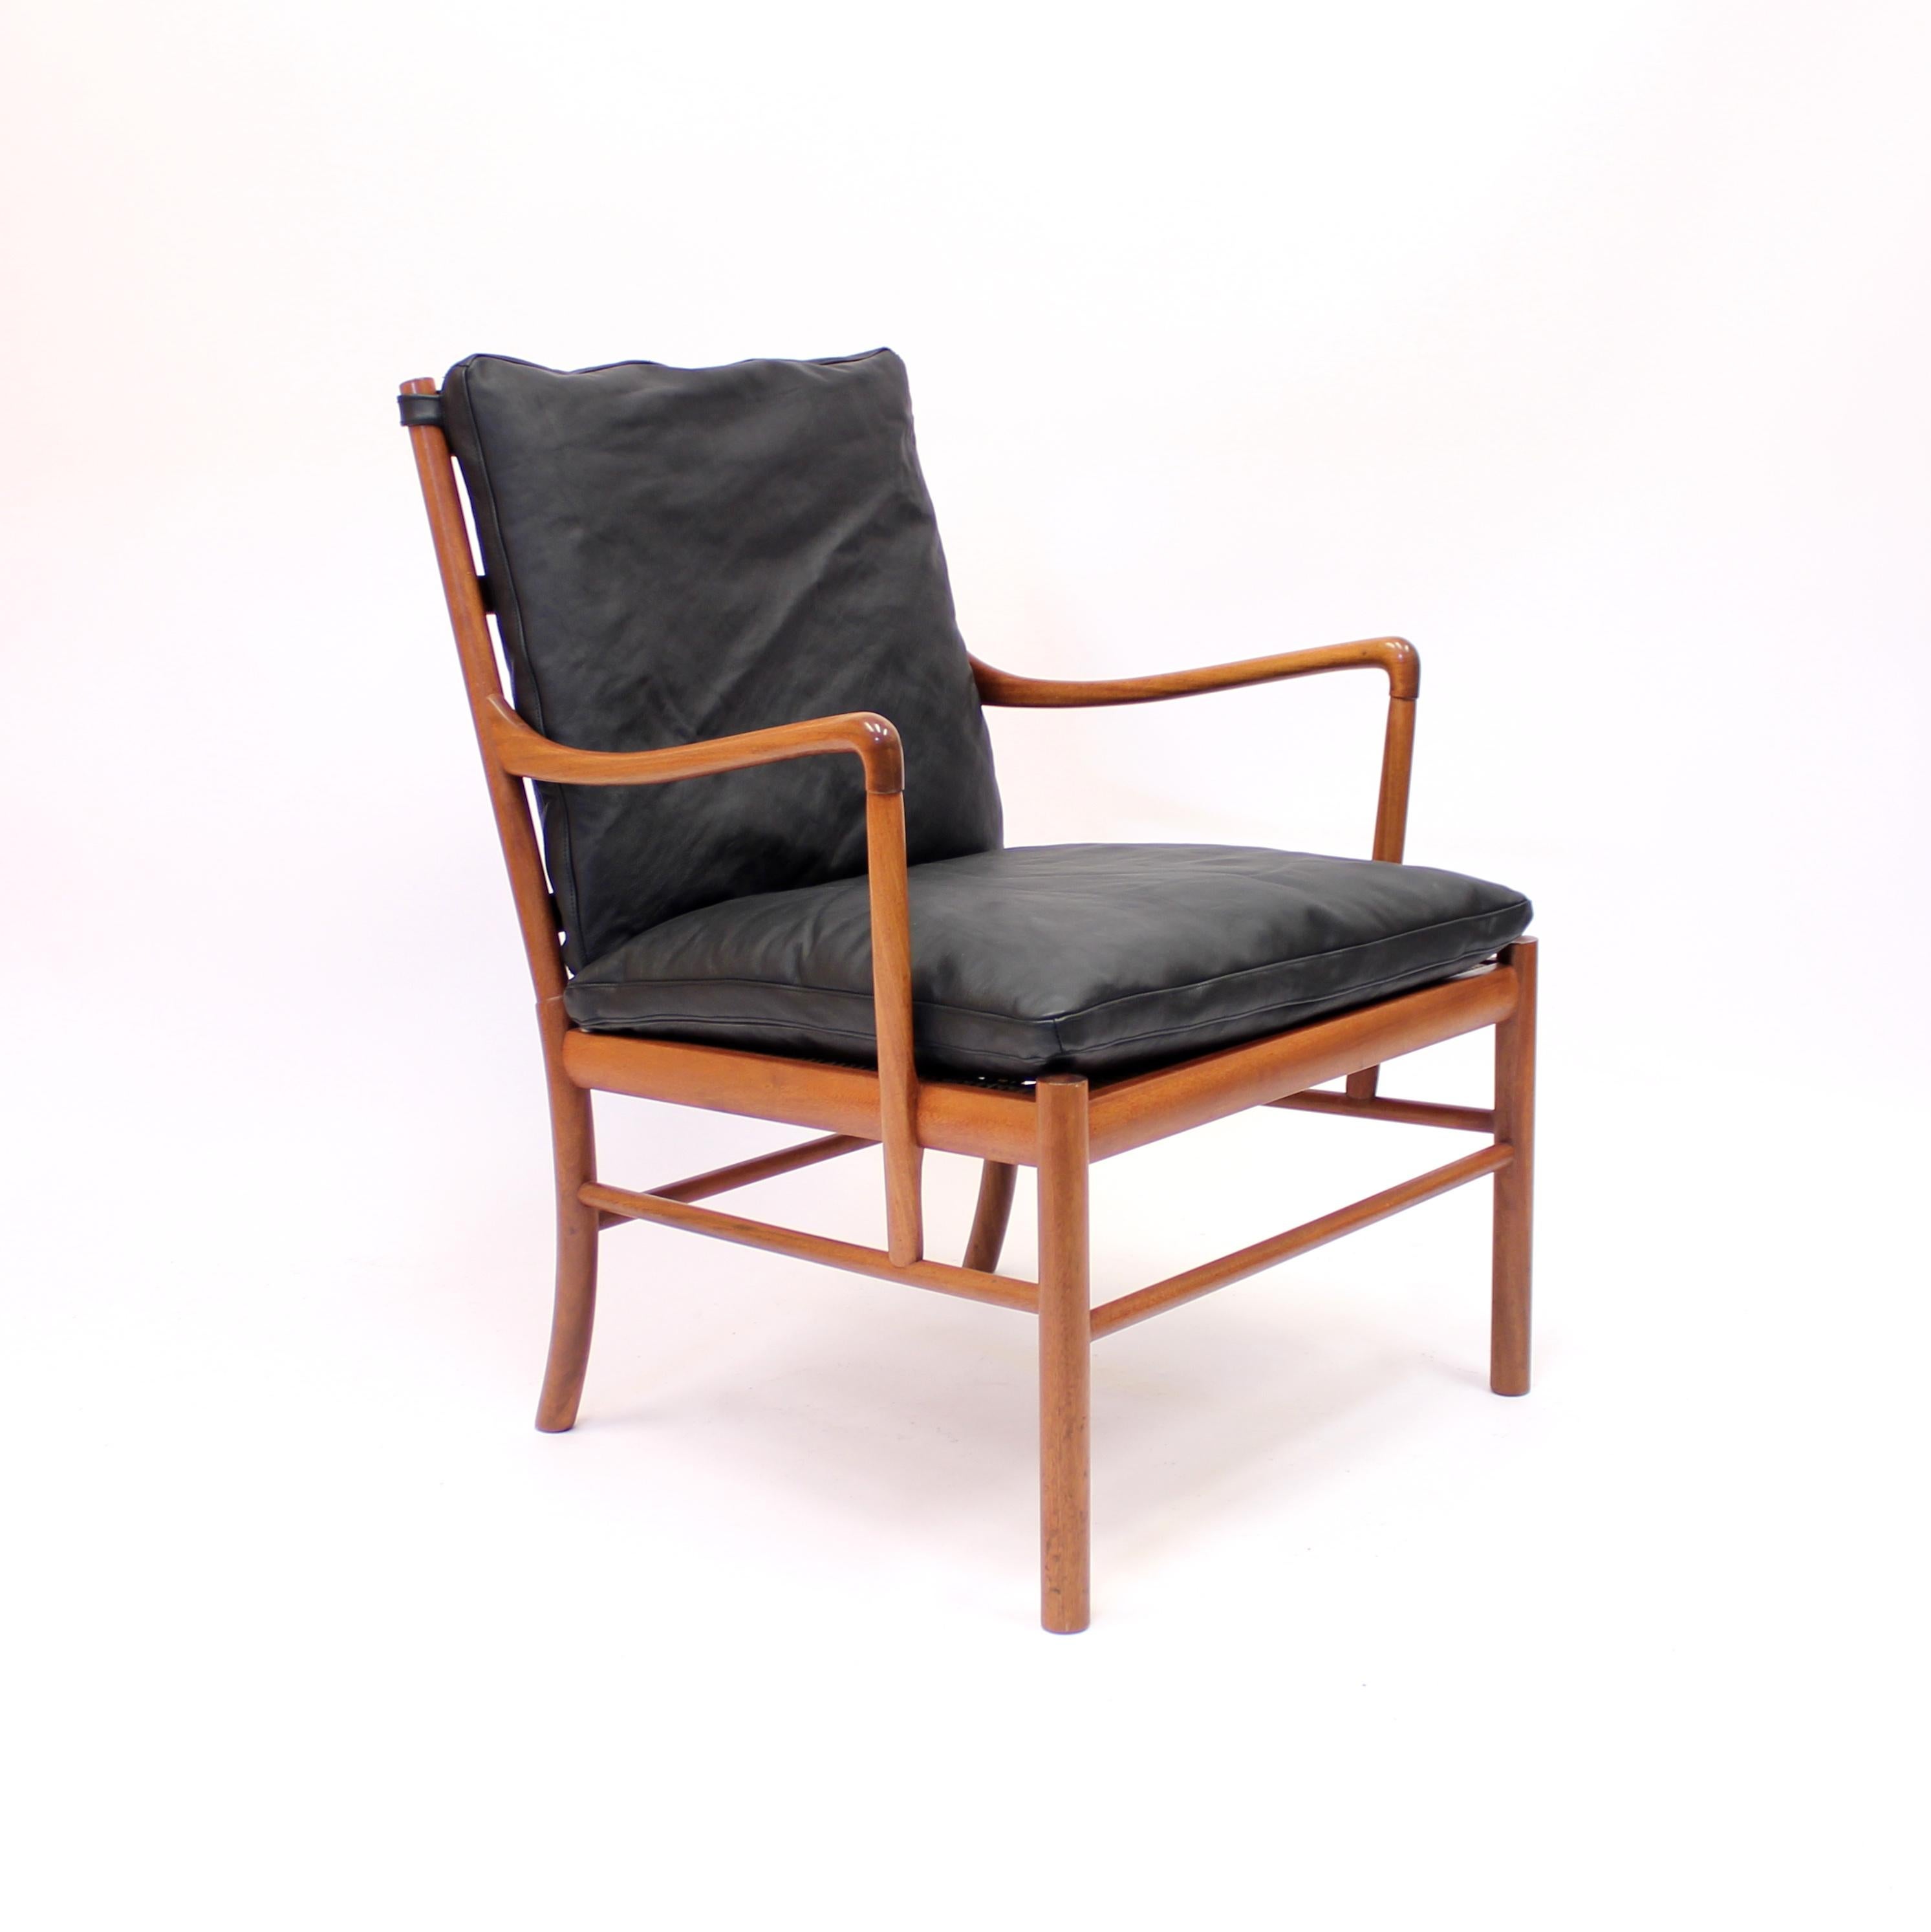 A genuine design classic, the Colonial chair designed by Ole Wanscher for Poul Jeppesen in 1949. This example were made a bit later in the late 20th century by the the same company but was at the time run by Peter Jeppesen and is marked accordingly